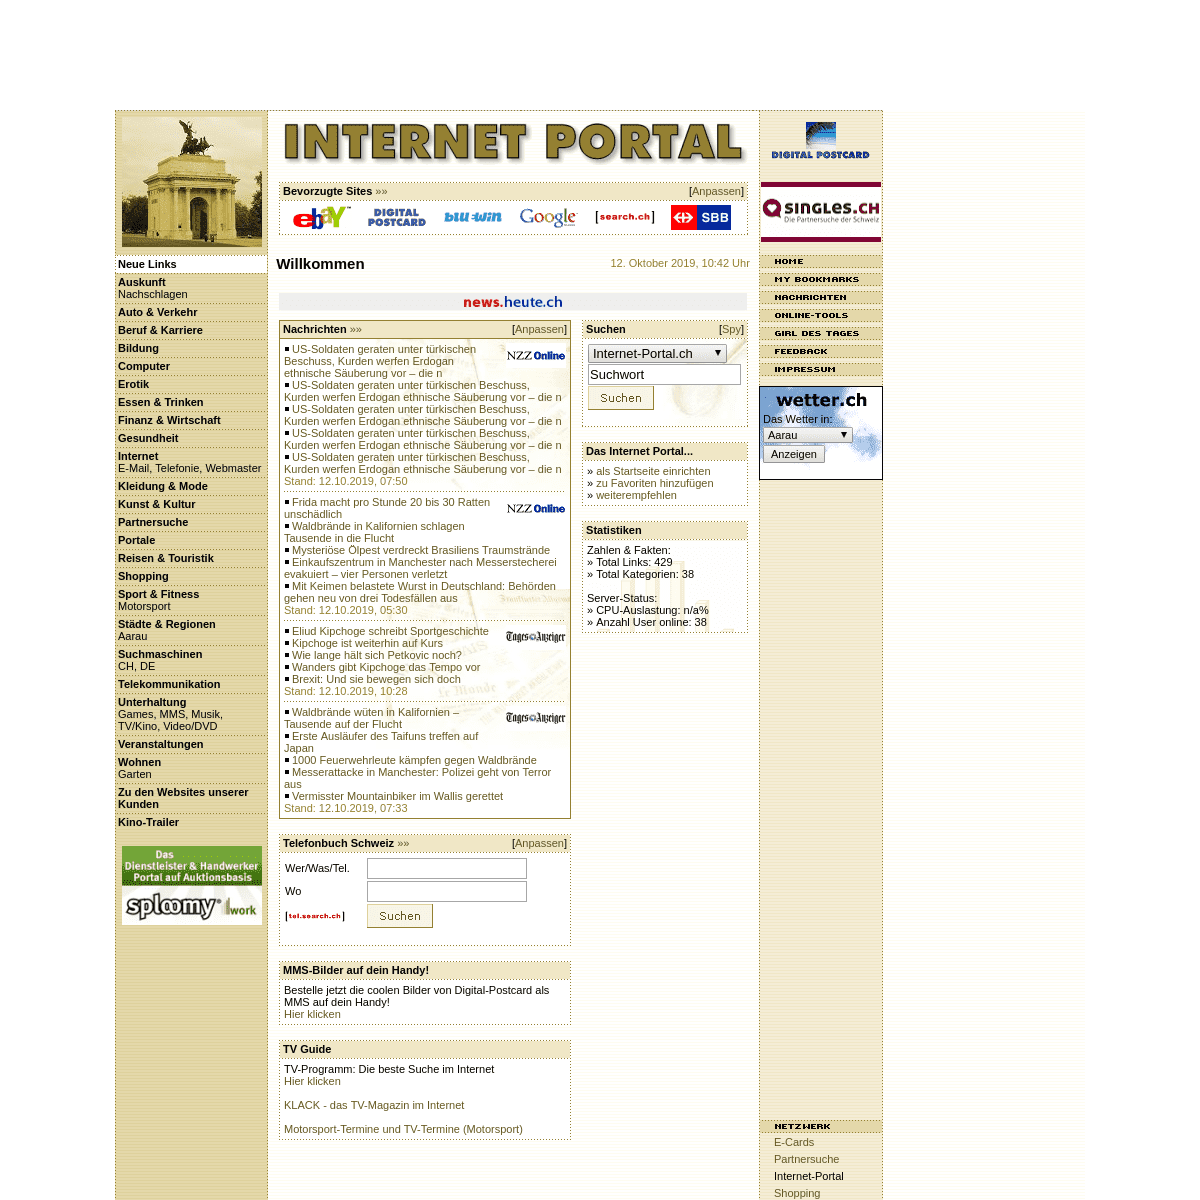 A complete backup of internet-portal.ch